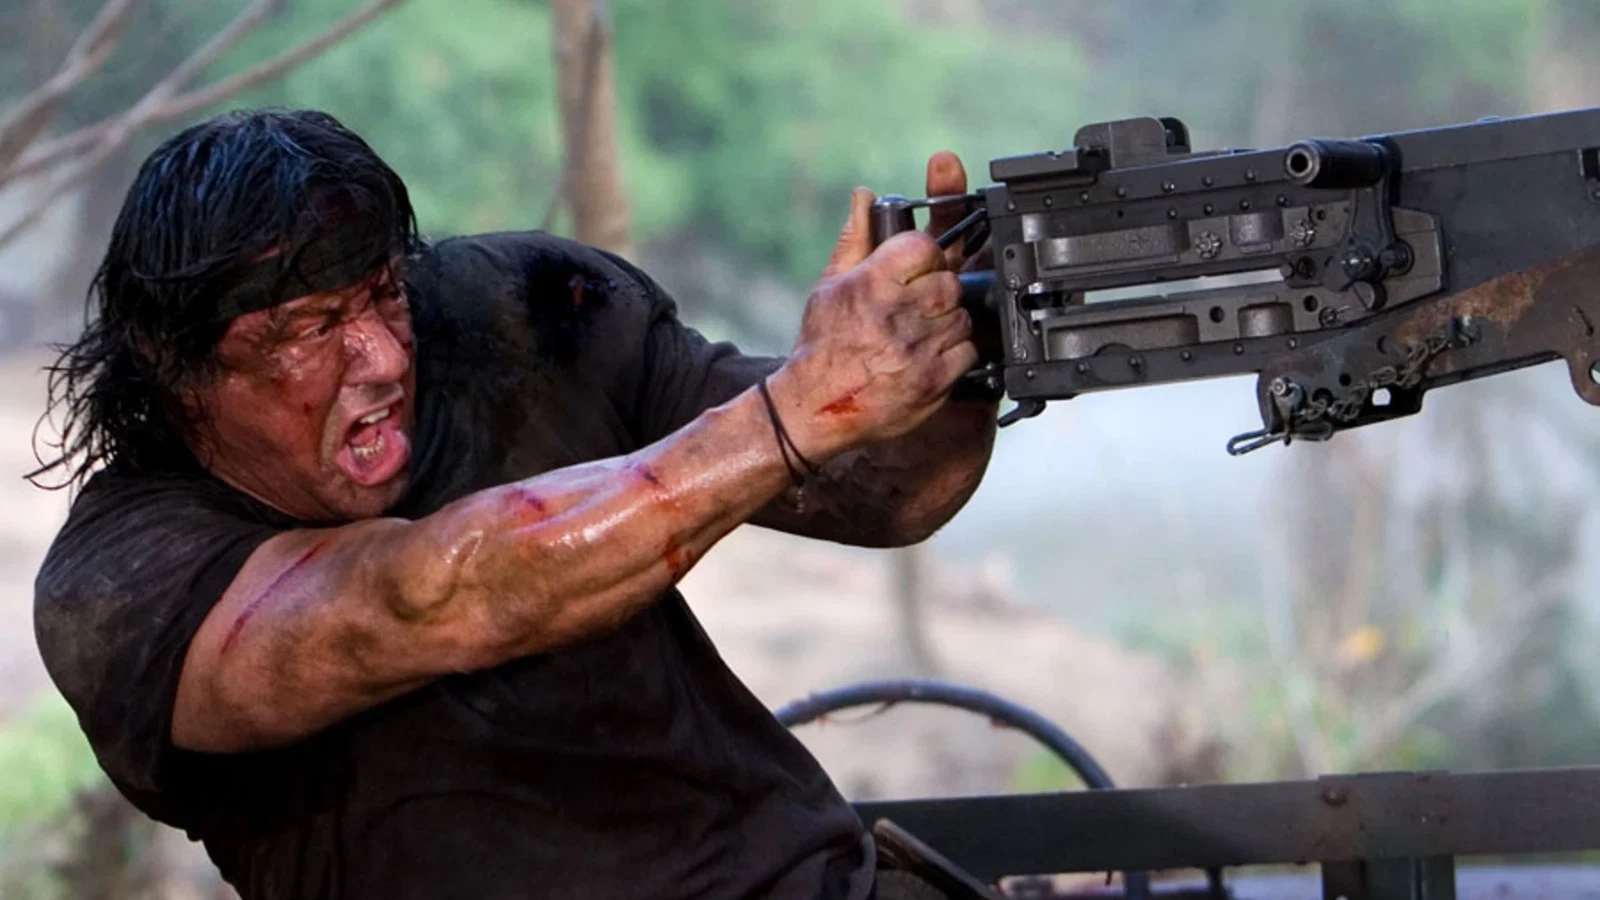 Sylvester Stallone in a still from the movie Rambo